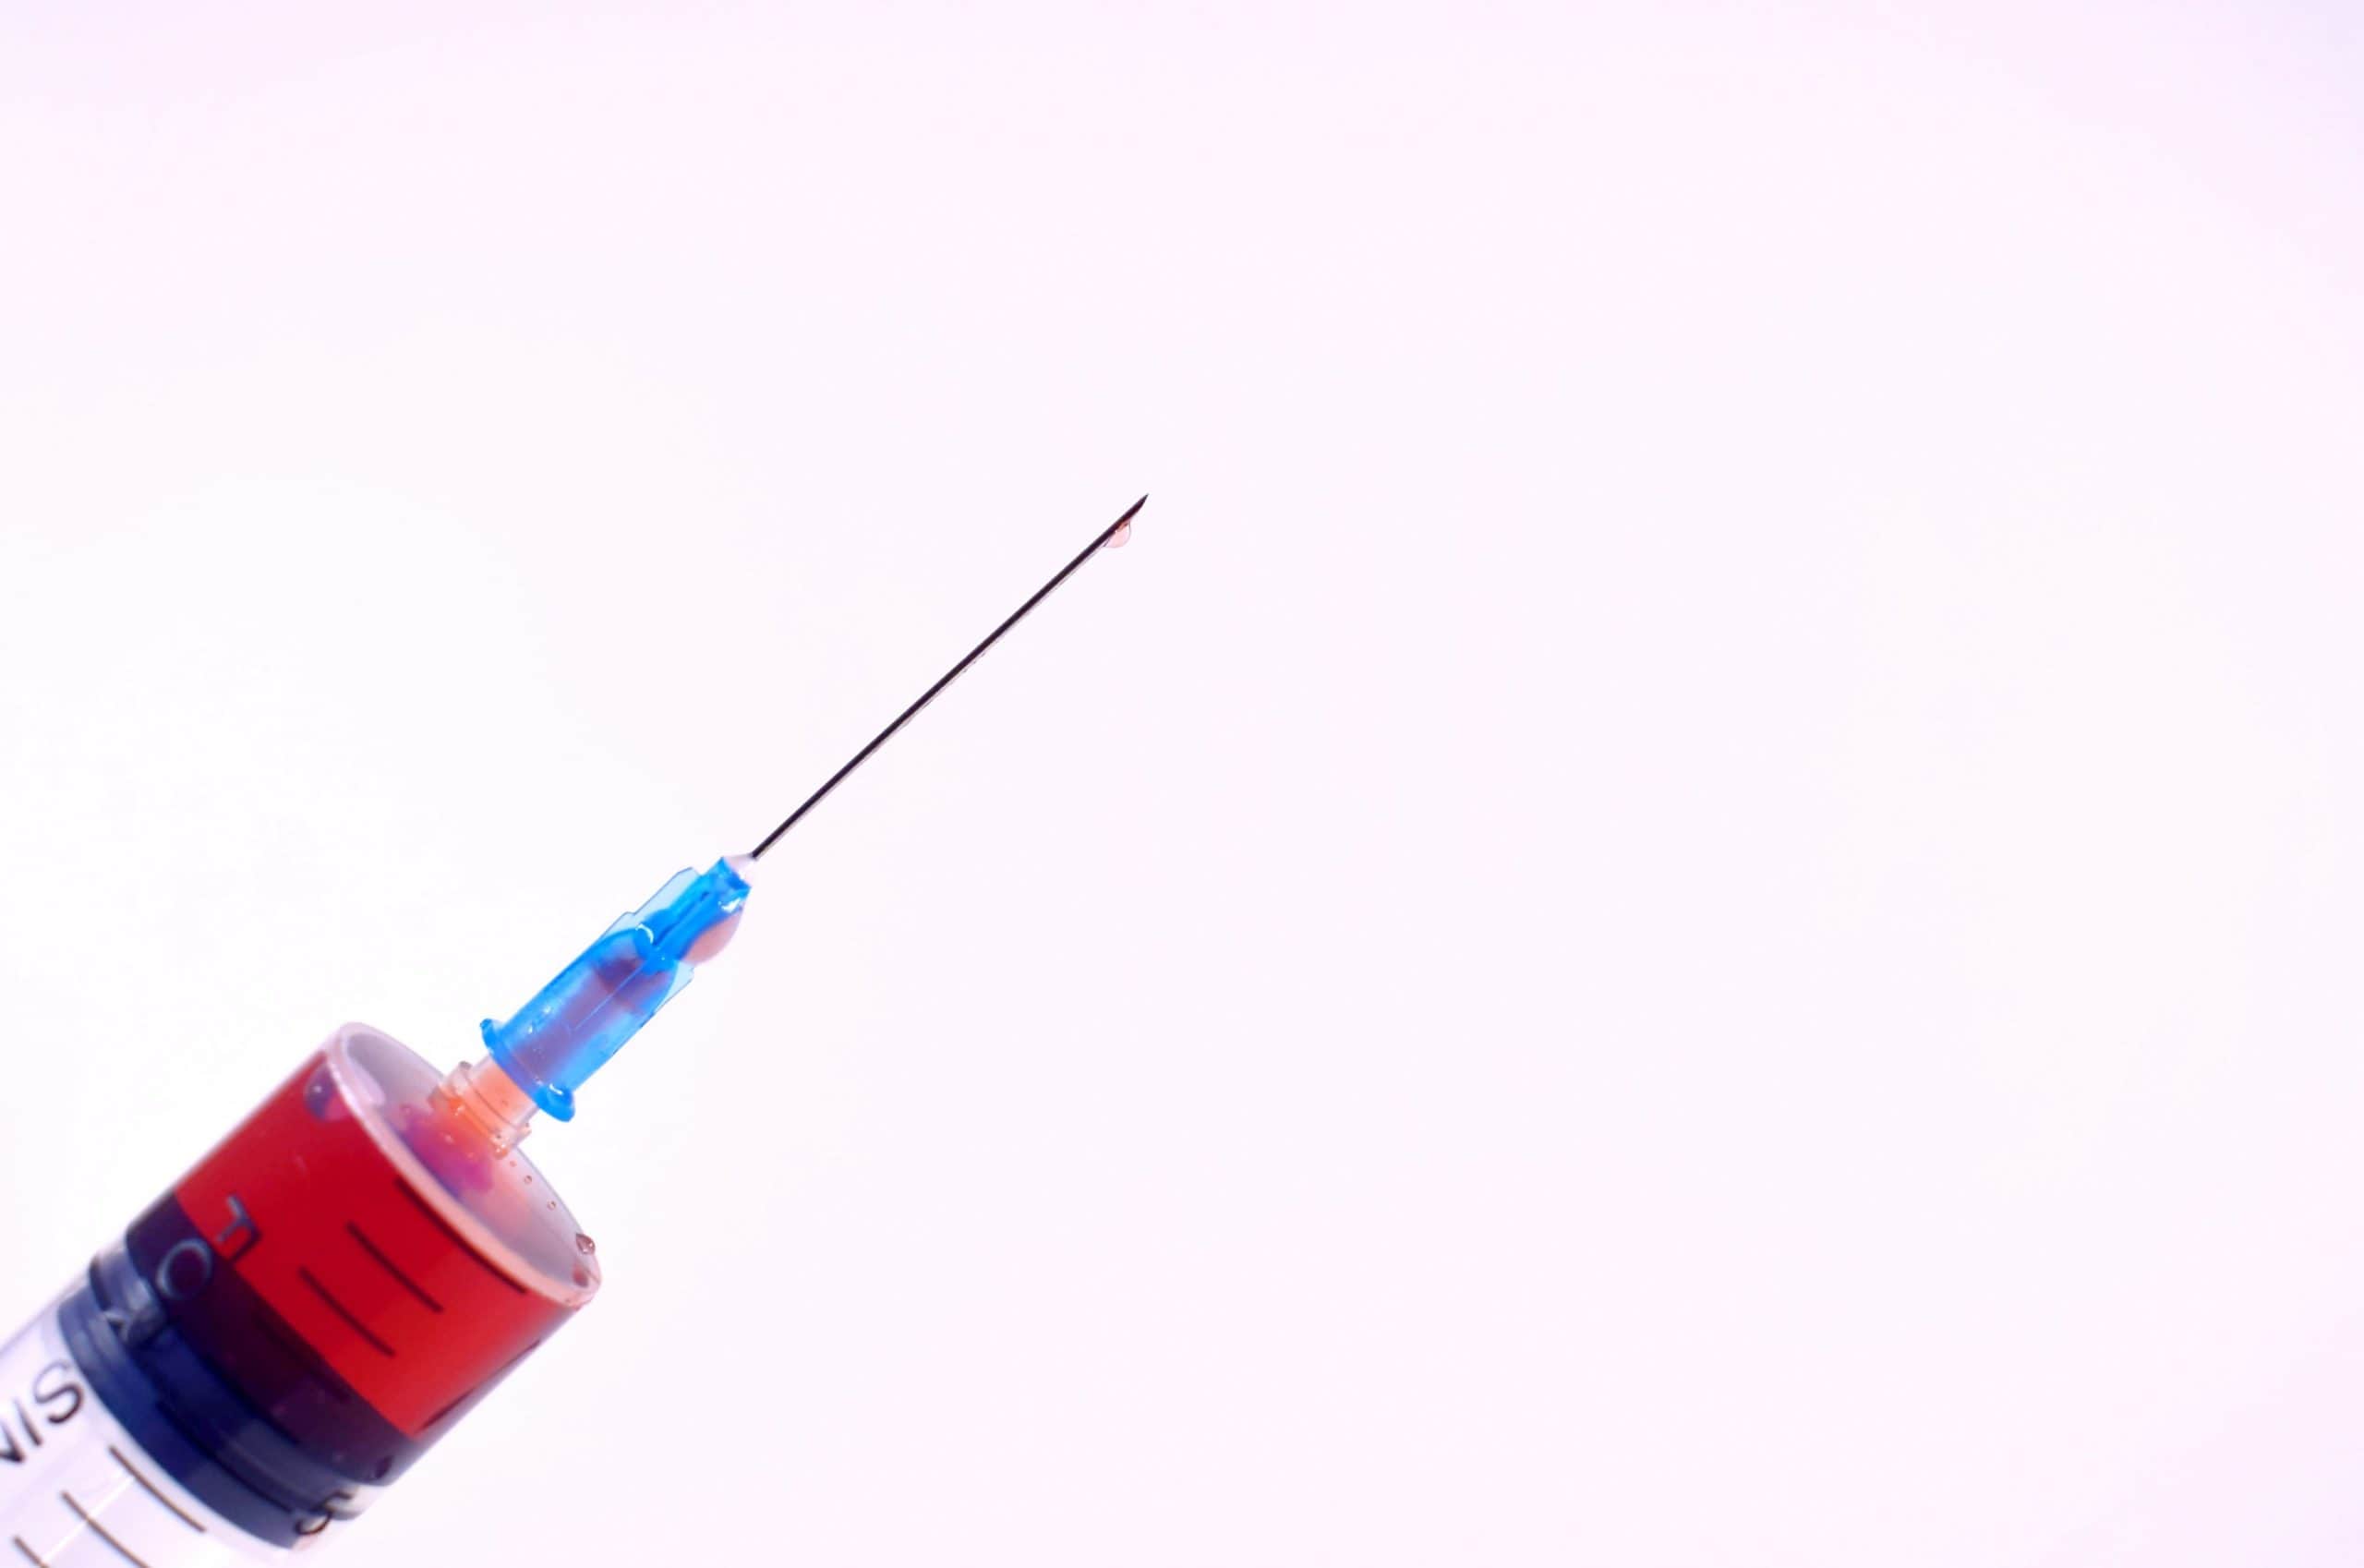 Vitamin B12 Injections Good Or Bad, Uses And Benefits